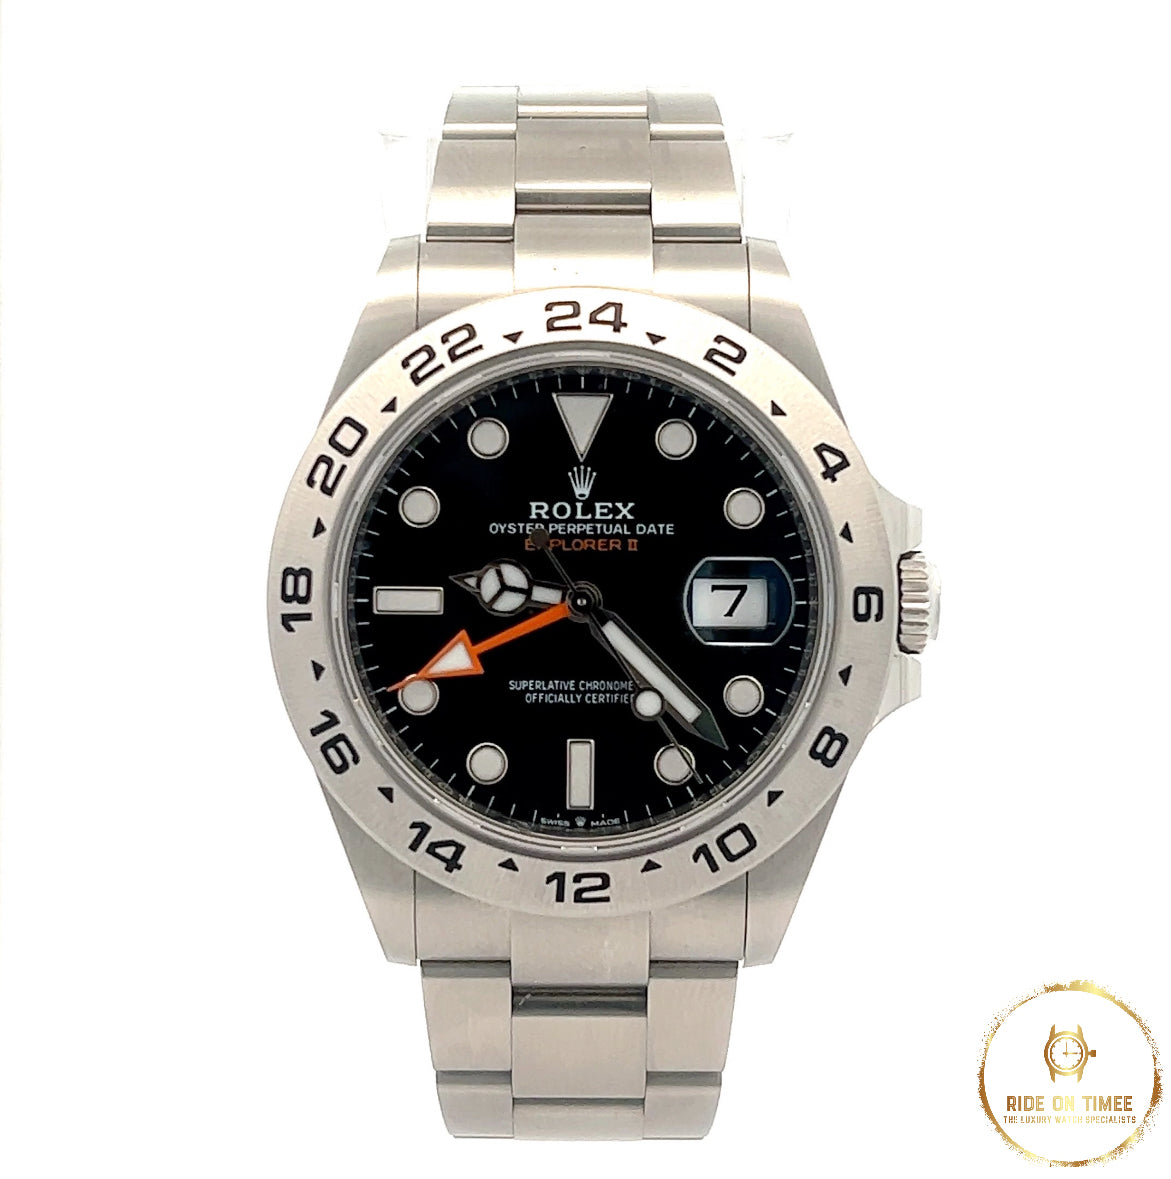 Rolex Explorer 2 Factory Black Dial ‘226570’ - Ride On Timee